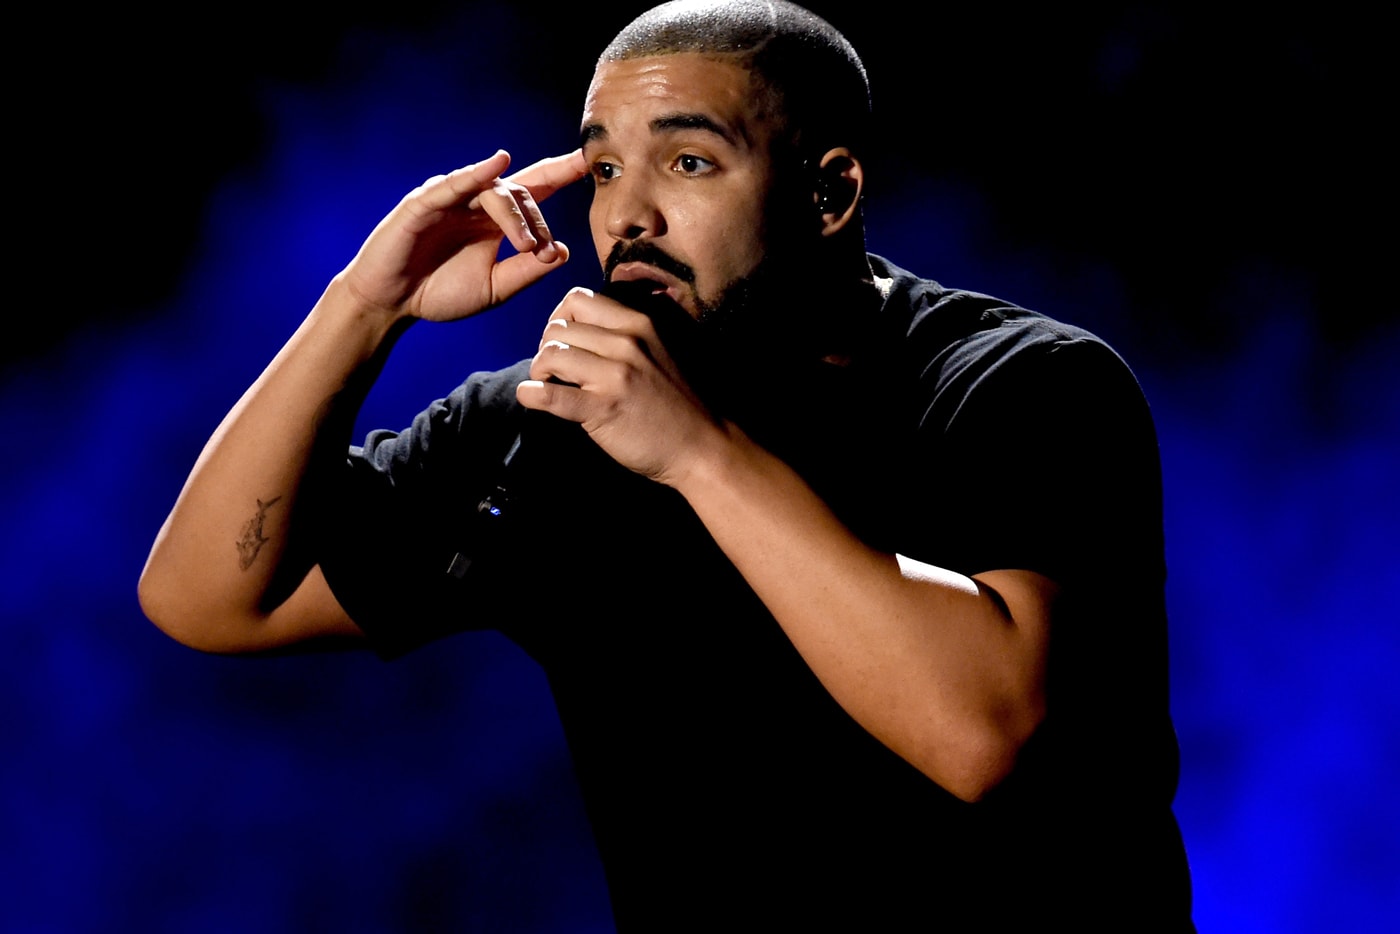 drake-launches-rb-music-career